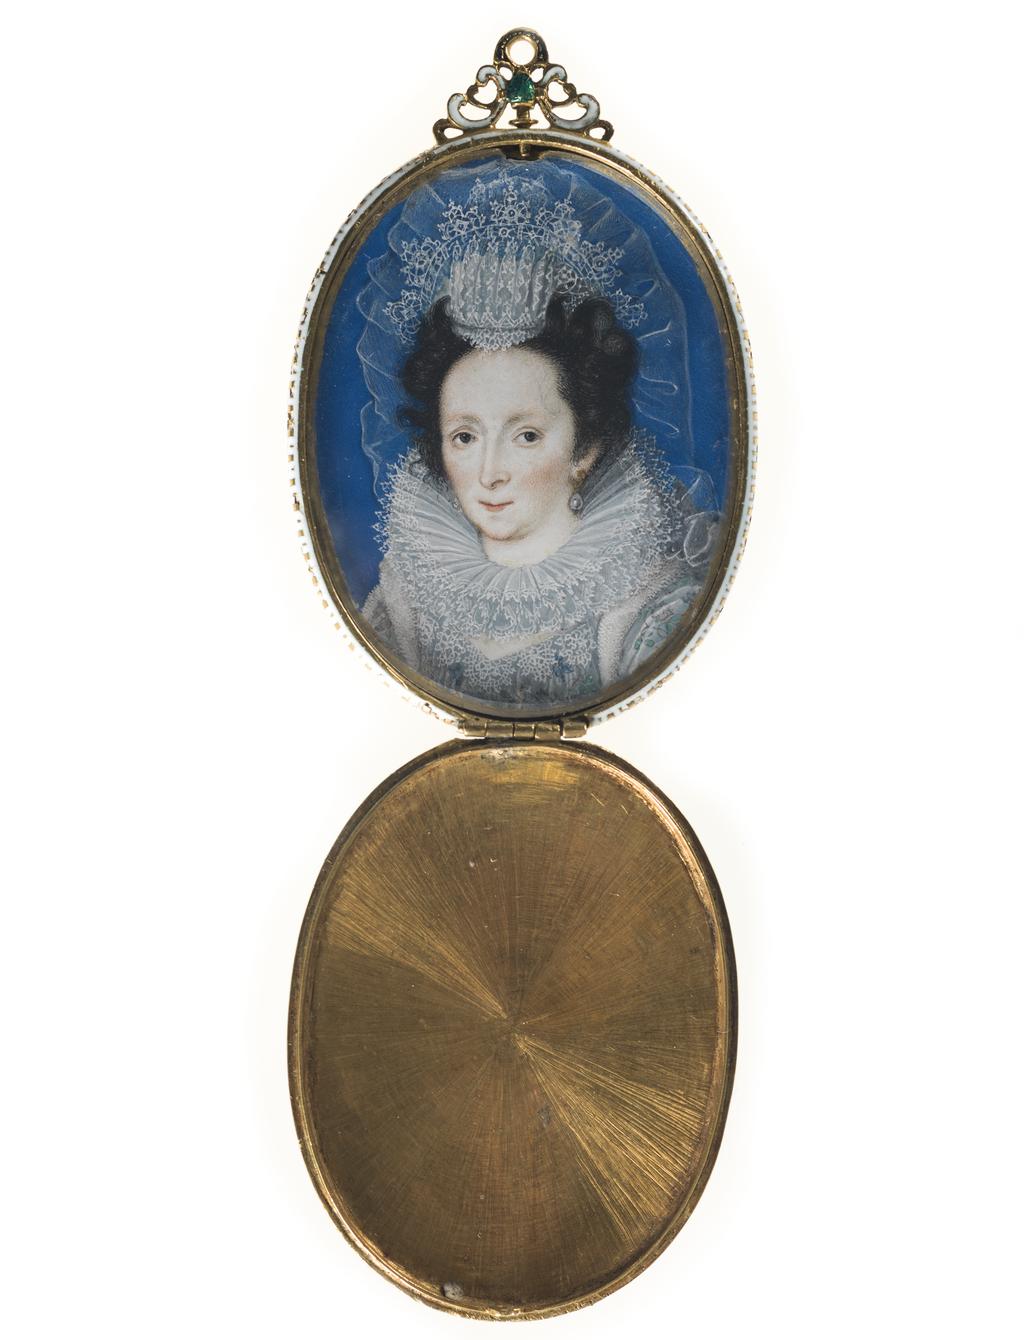 An image of Elizabeth, Countess of Rutland 1585-1612. Oliver, Isaac I (school of, British, c.1556-1617). Watercolour on vellum on card, height 54 mm, width 42 mm, circa 1612. Elizabethan.